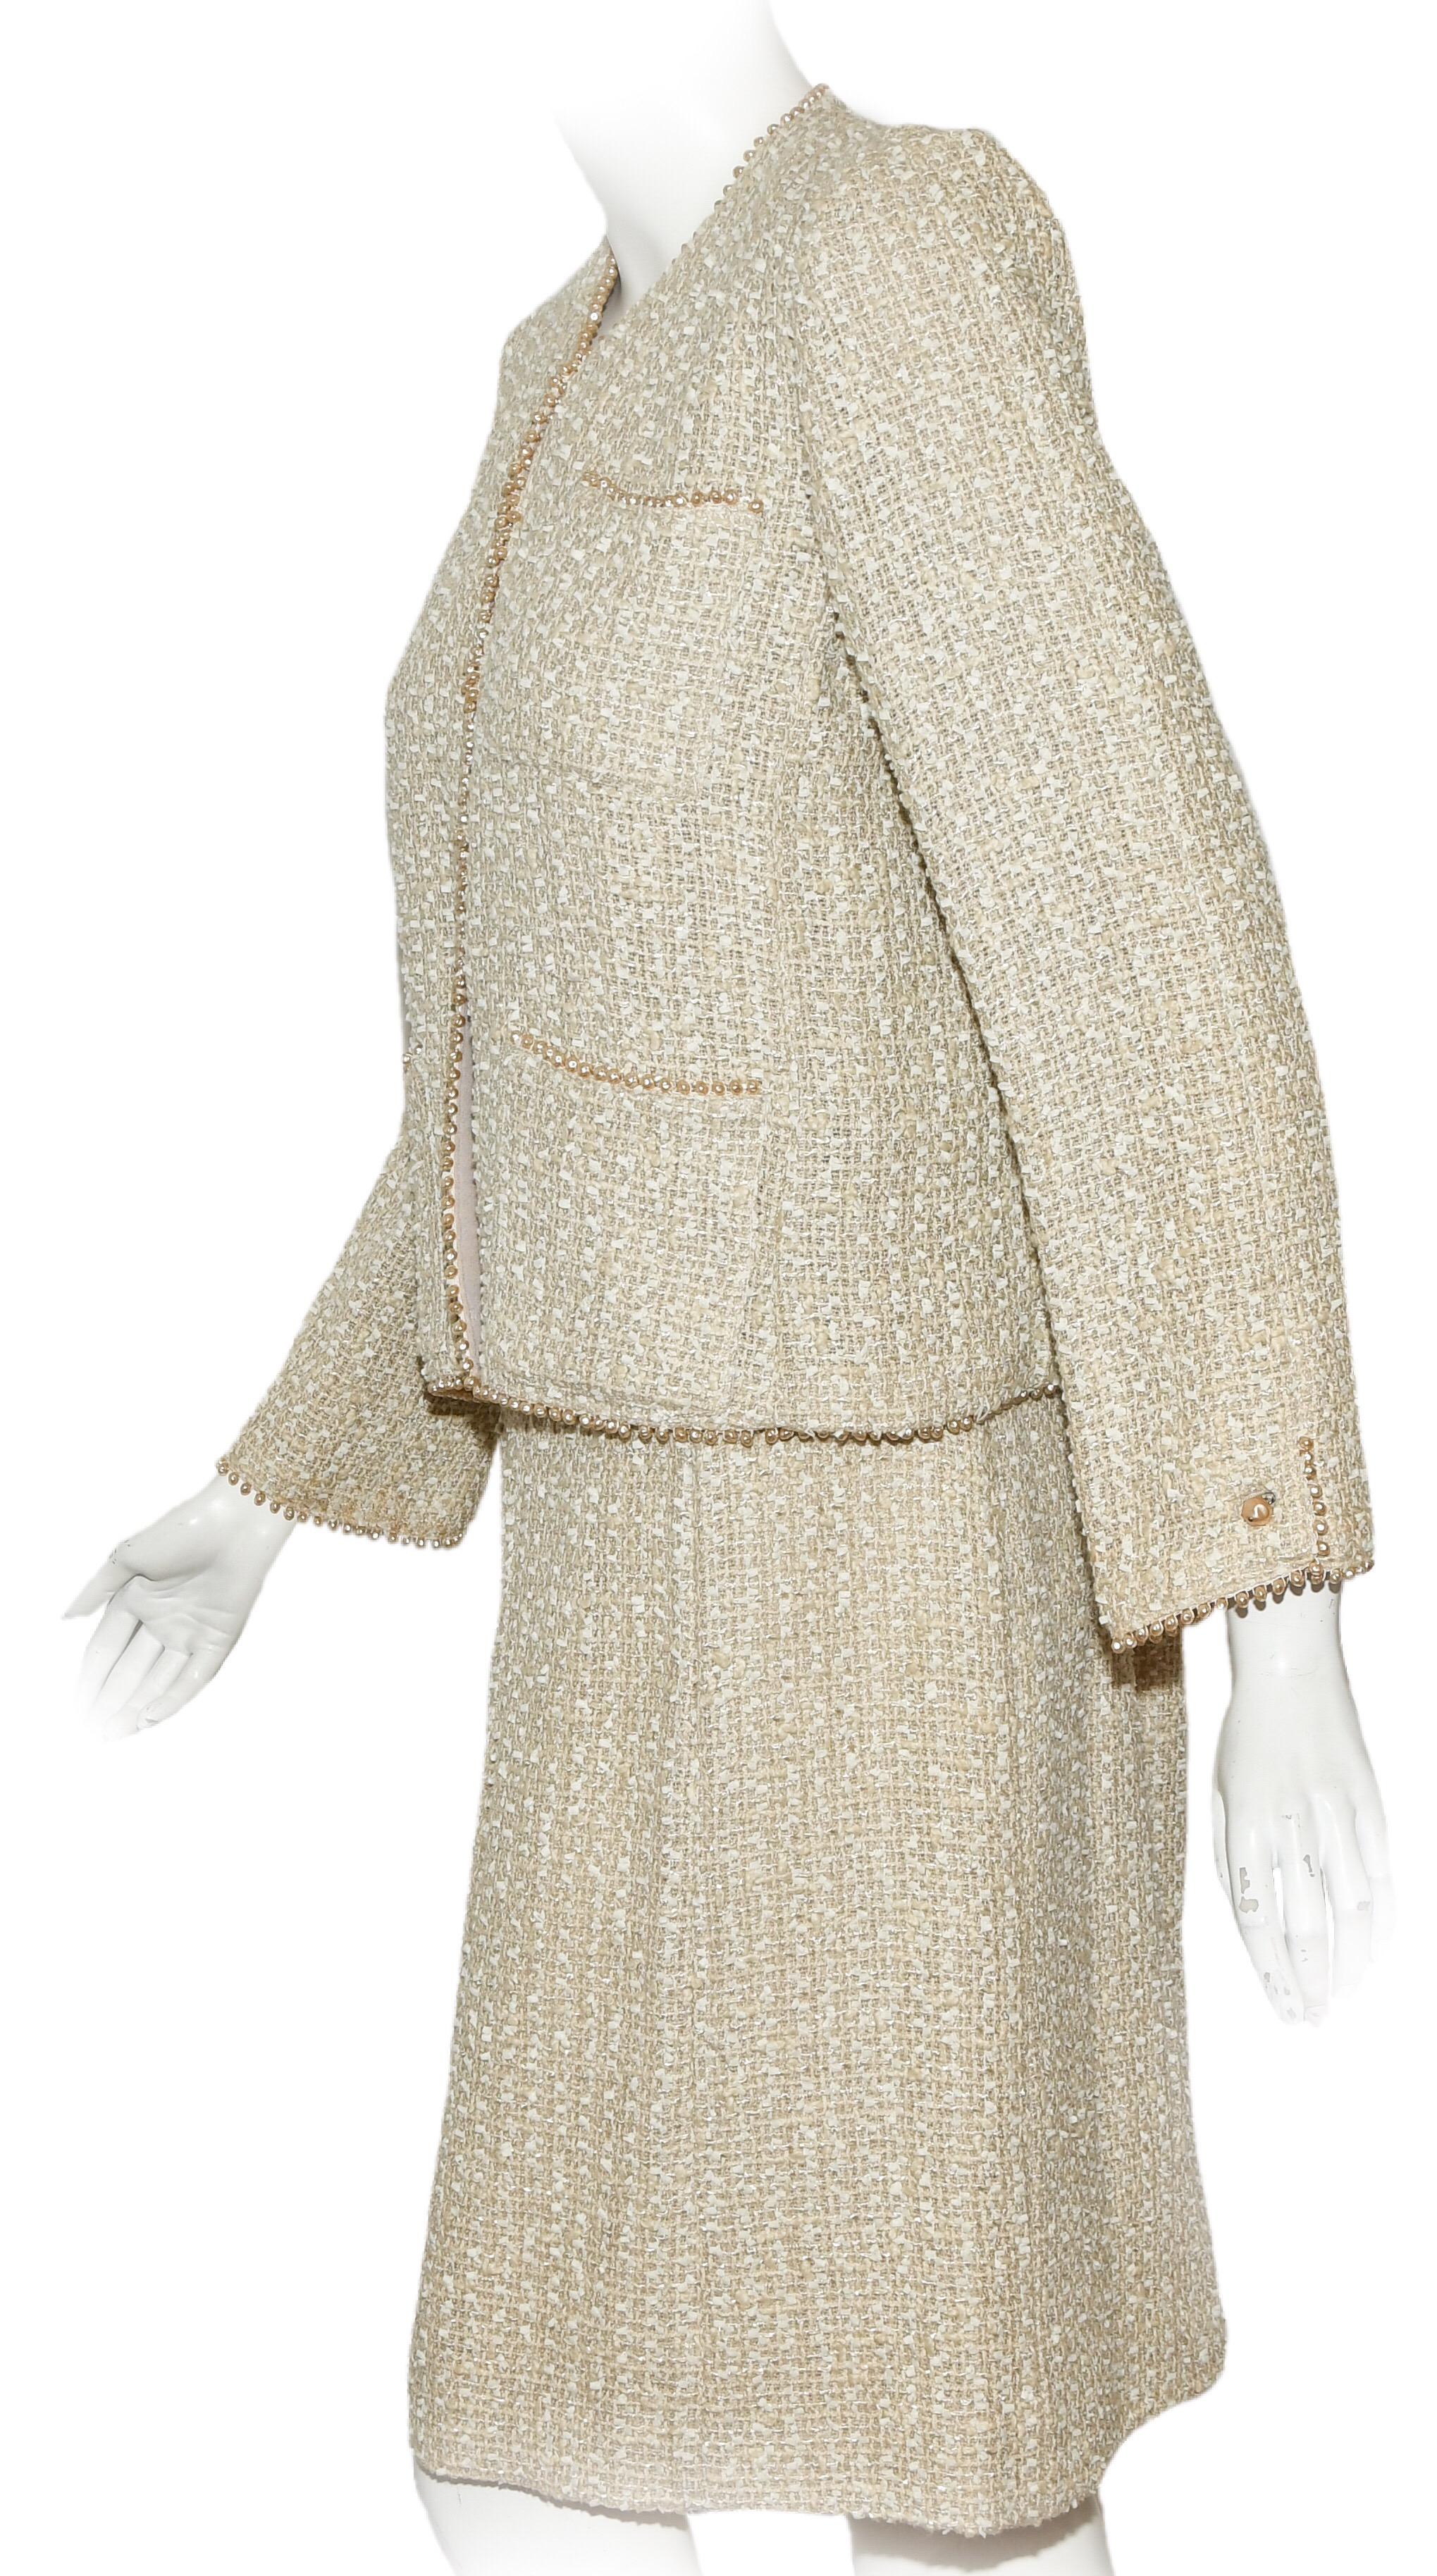 Chanel nacar beige skirt suit from the Spring 1999 collection was very appropriate for the season, even a bit beachy,  bringing in the pearls!  Chanel's boucle dinner suit is trimmed in blush freshwater pearls along the cuffs that are accentuated